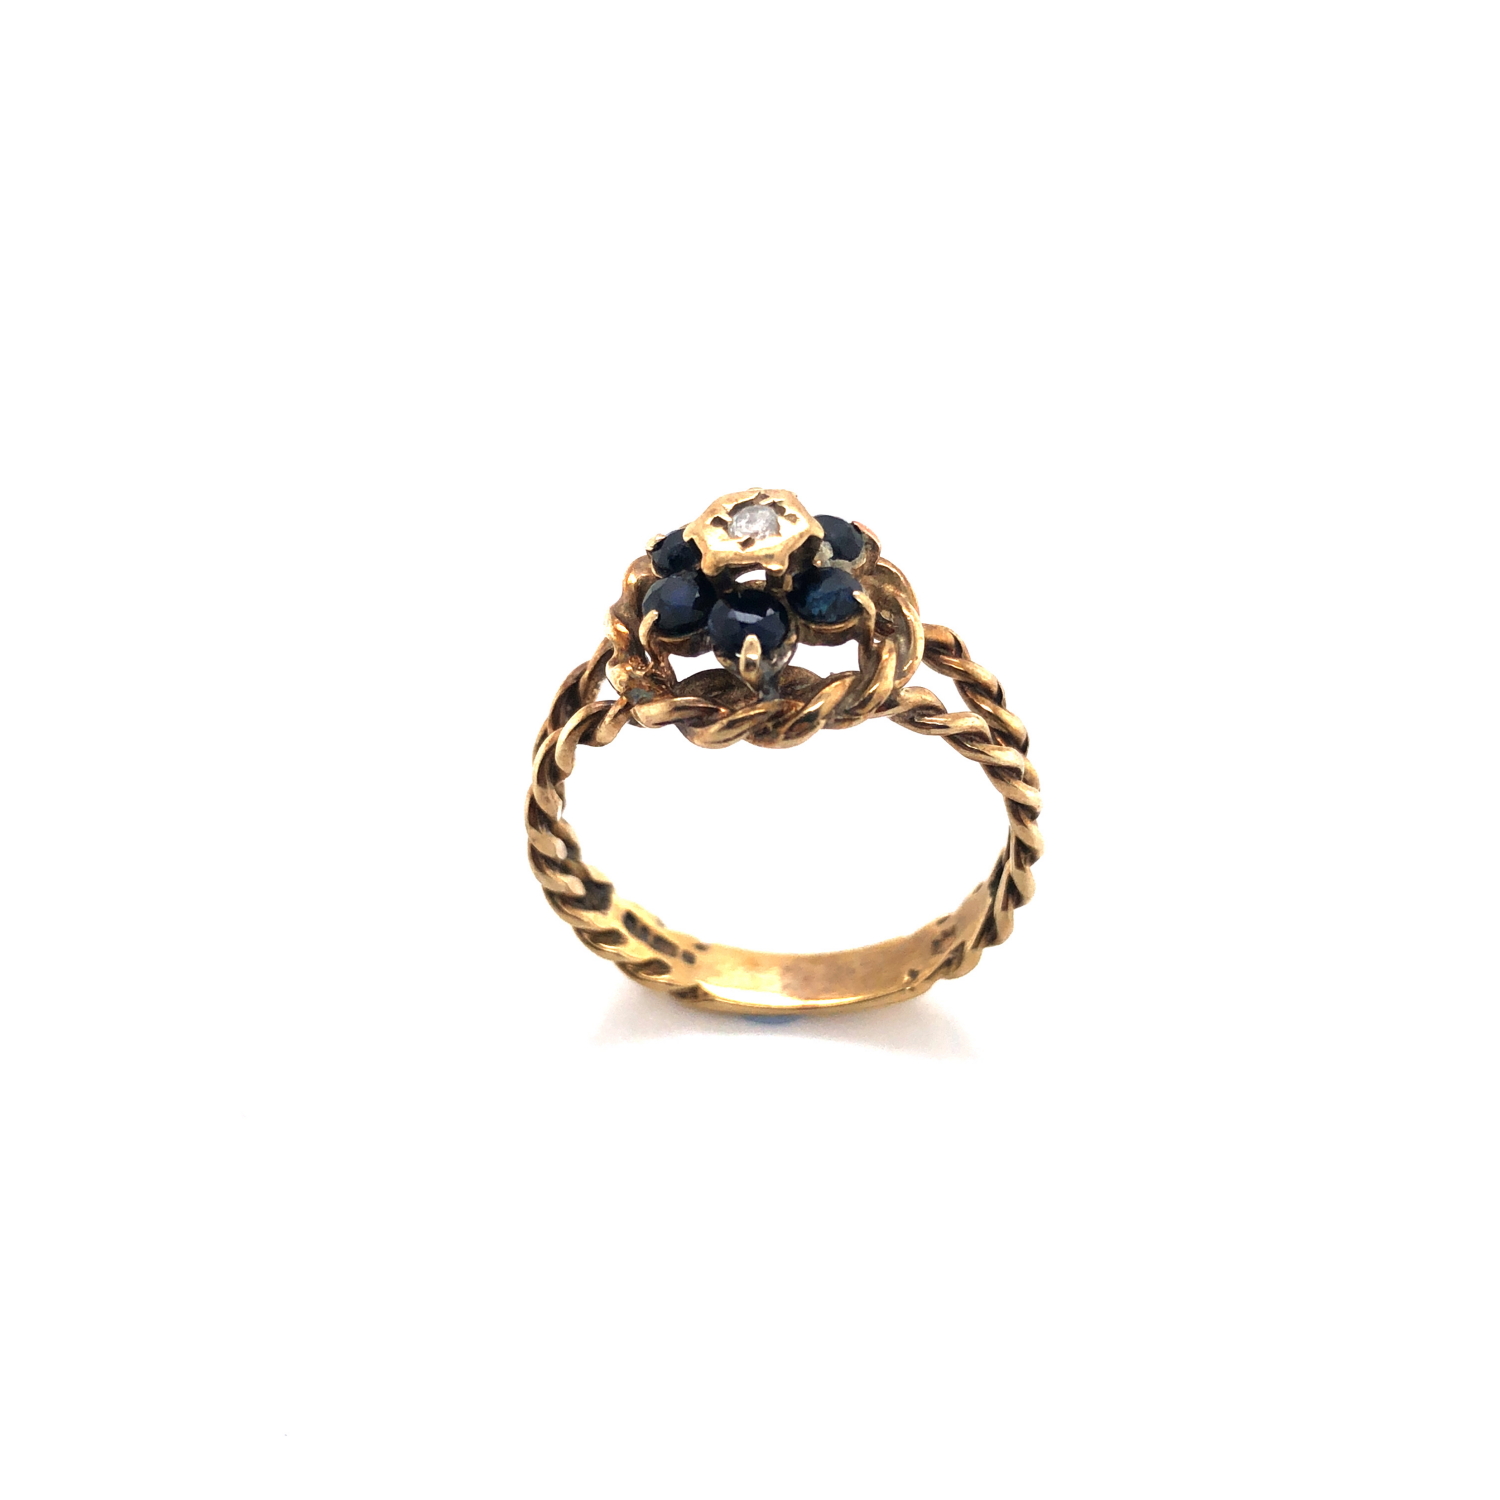 A VINTAGE 9ct HALLMARKED SAPPHIRE AND DIAMOND CLUSTER RING WITH A DOUBLE WOVEN ROPE BAND. DATED - Image 4 of 5